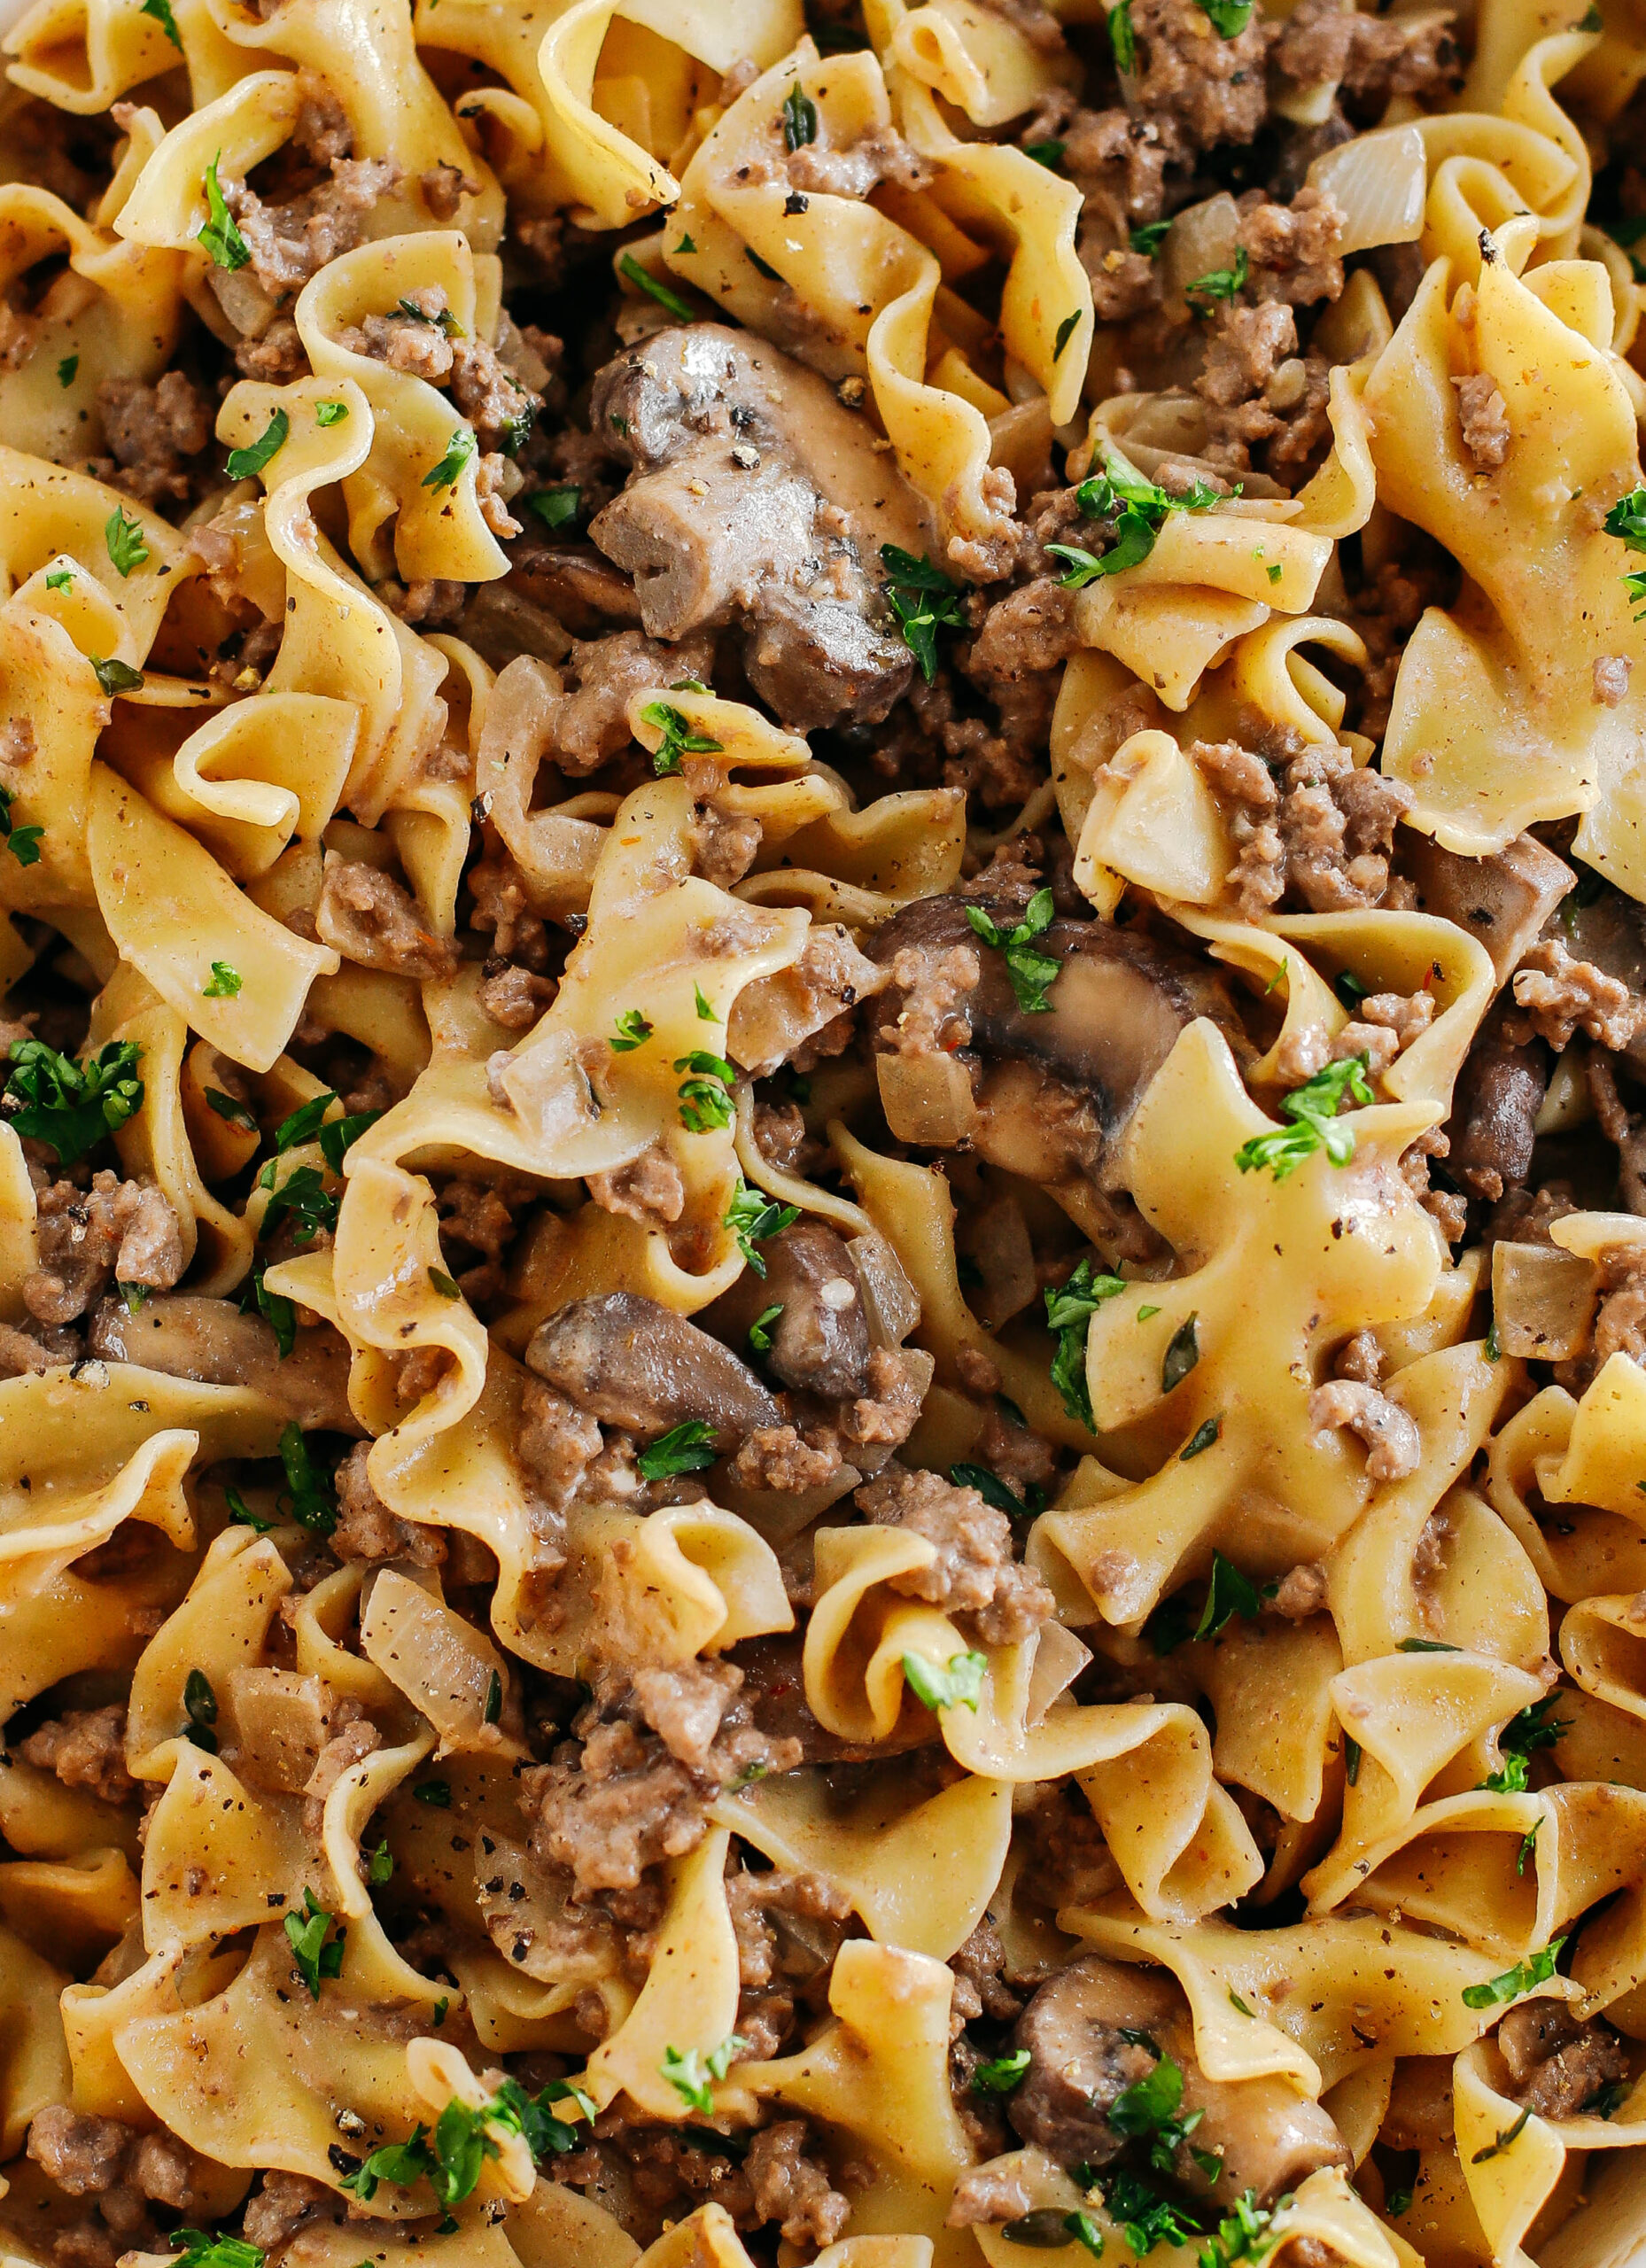 This Easy Beef Stroganoff Casserole is the ultimate family-friendly comfort food! The perfect weeknight meal made with egg noodles and smothered in the most delicious creamy mushroom sauce in just 30 minutes!